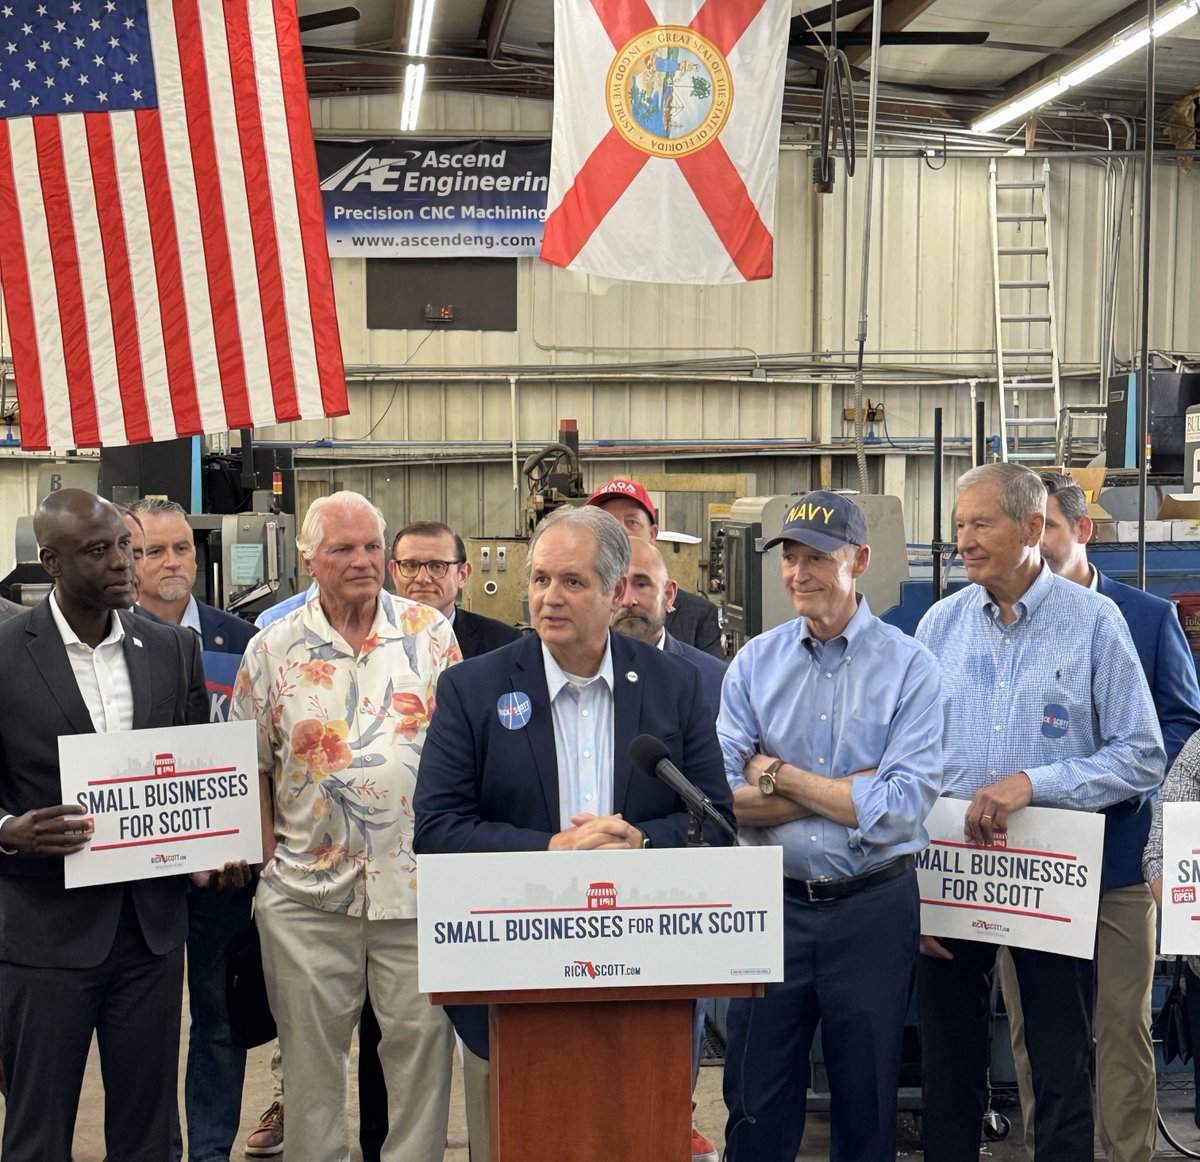 Honored to stand with our good friend @scottforflorida, endorsing his re-election to the U.S. Senate so he can continue to fight for jobs and a strong economy in Florida on behalf of our local businesses and families. #secureFL #Florida Learn more here: bit.ly/3WJmEkb